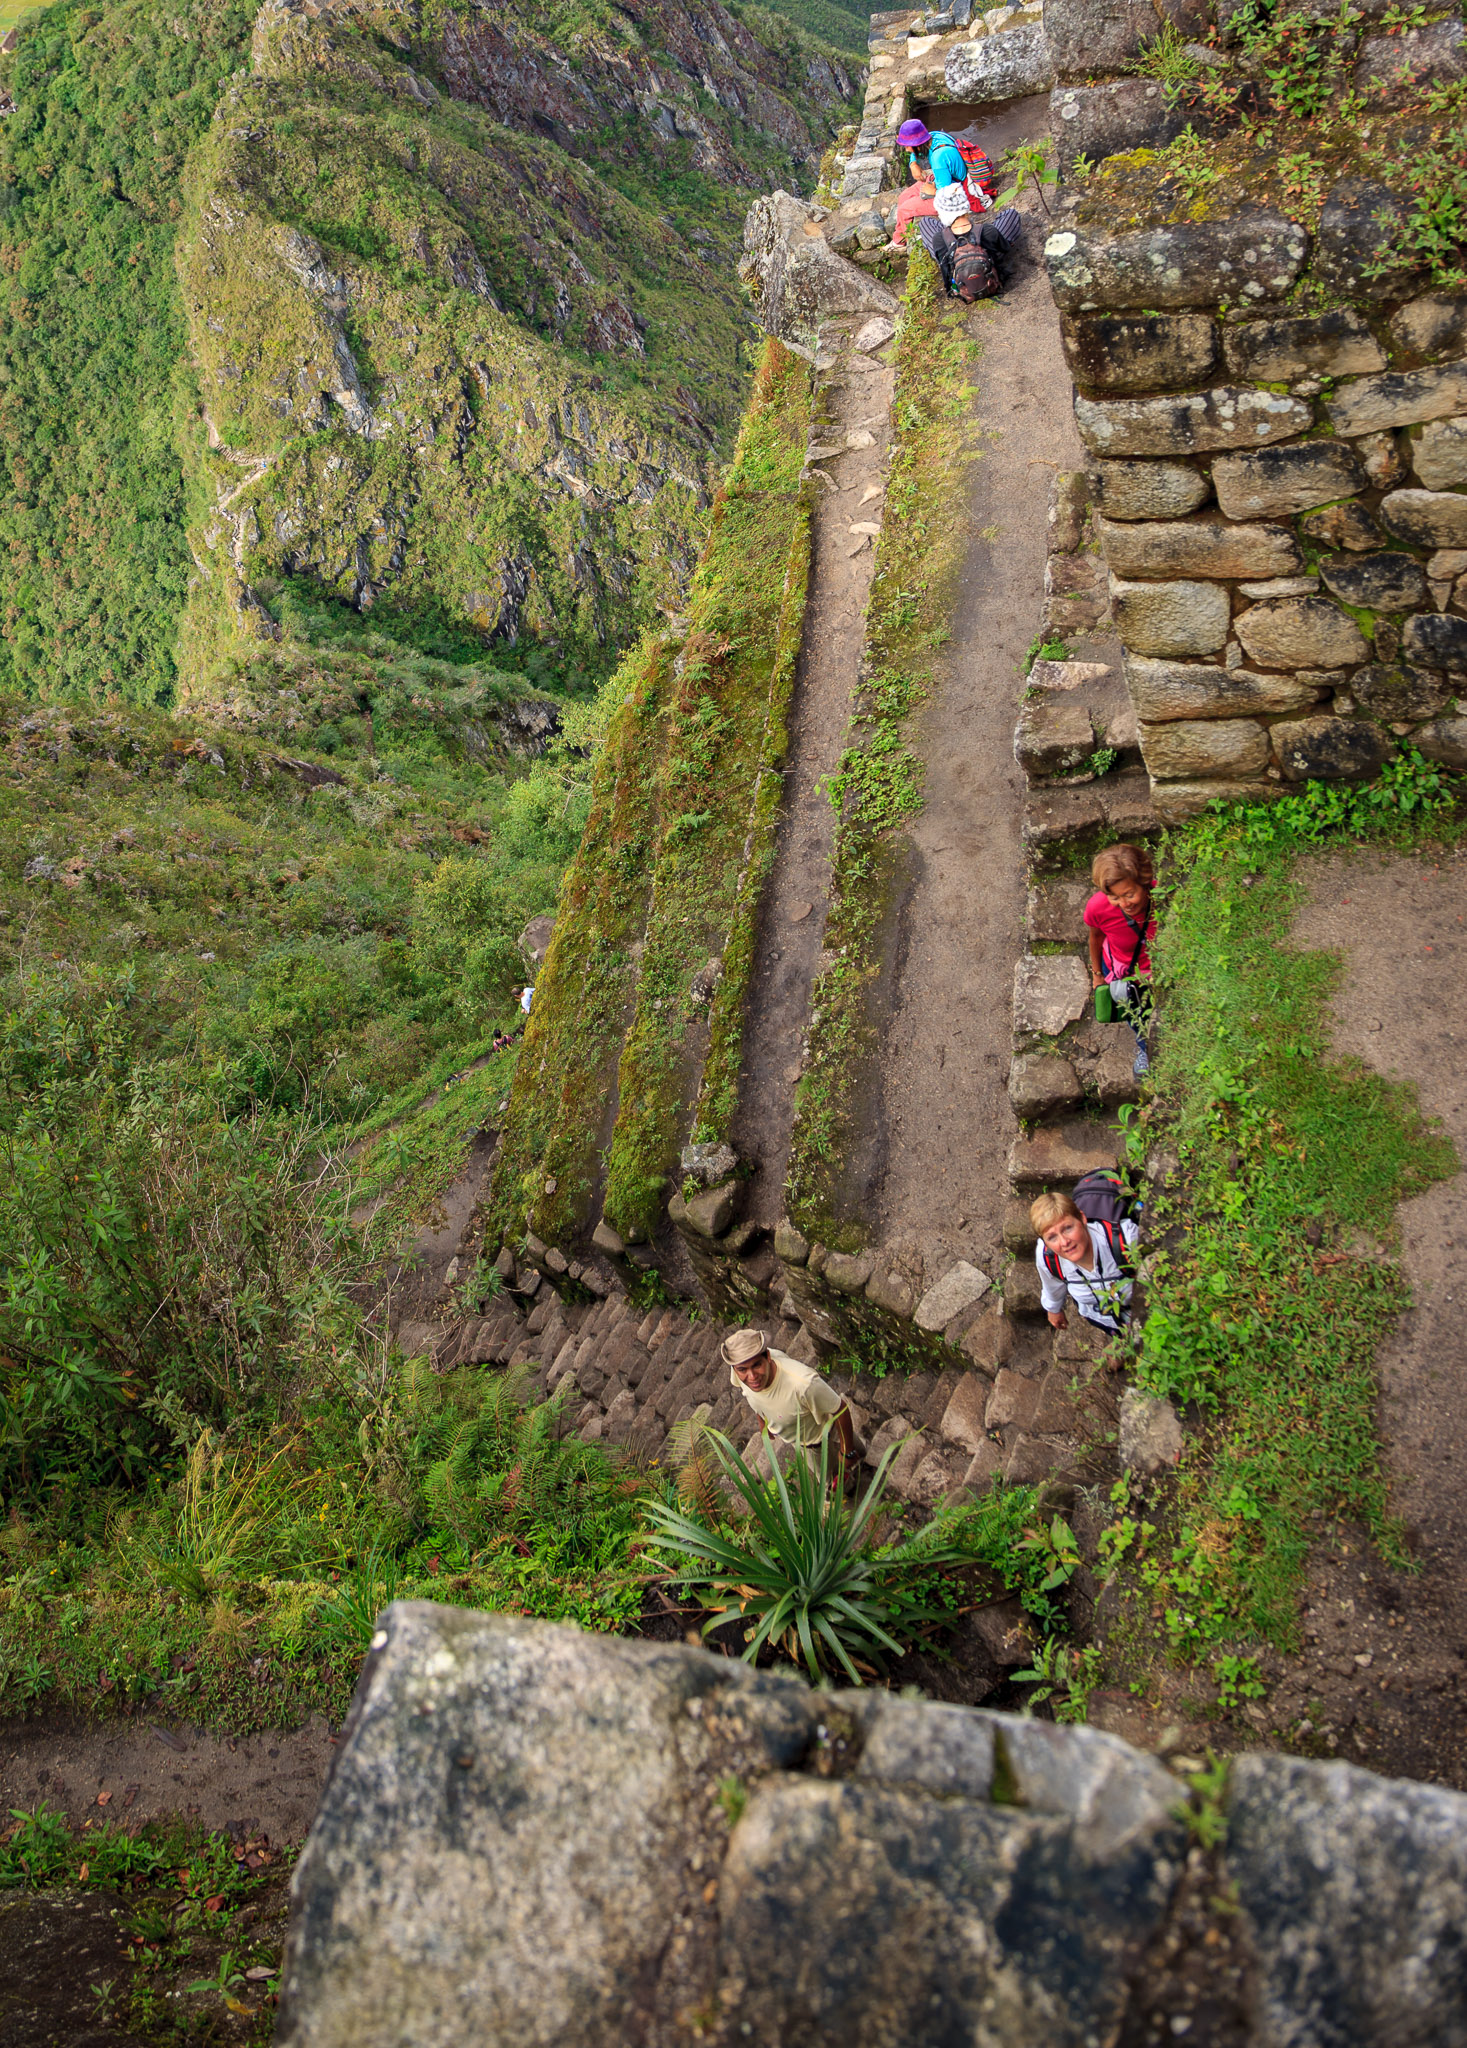 Now for the steep descent from Wayna Picchu